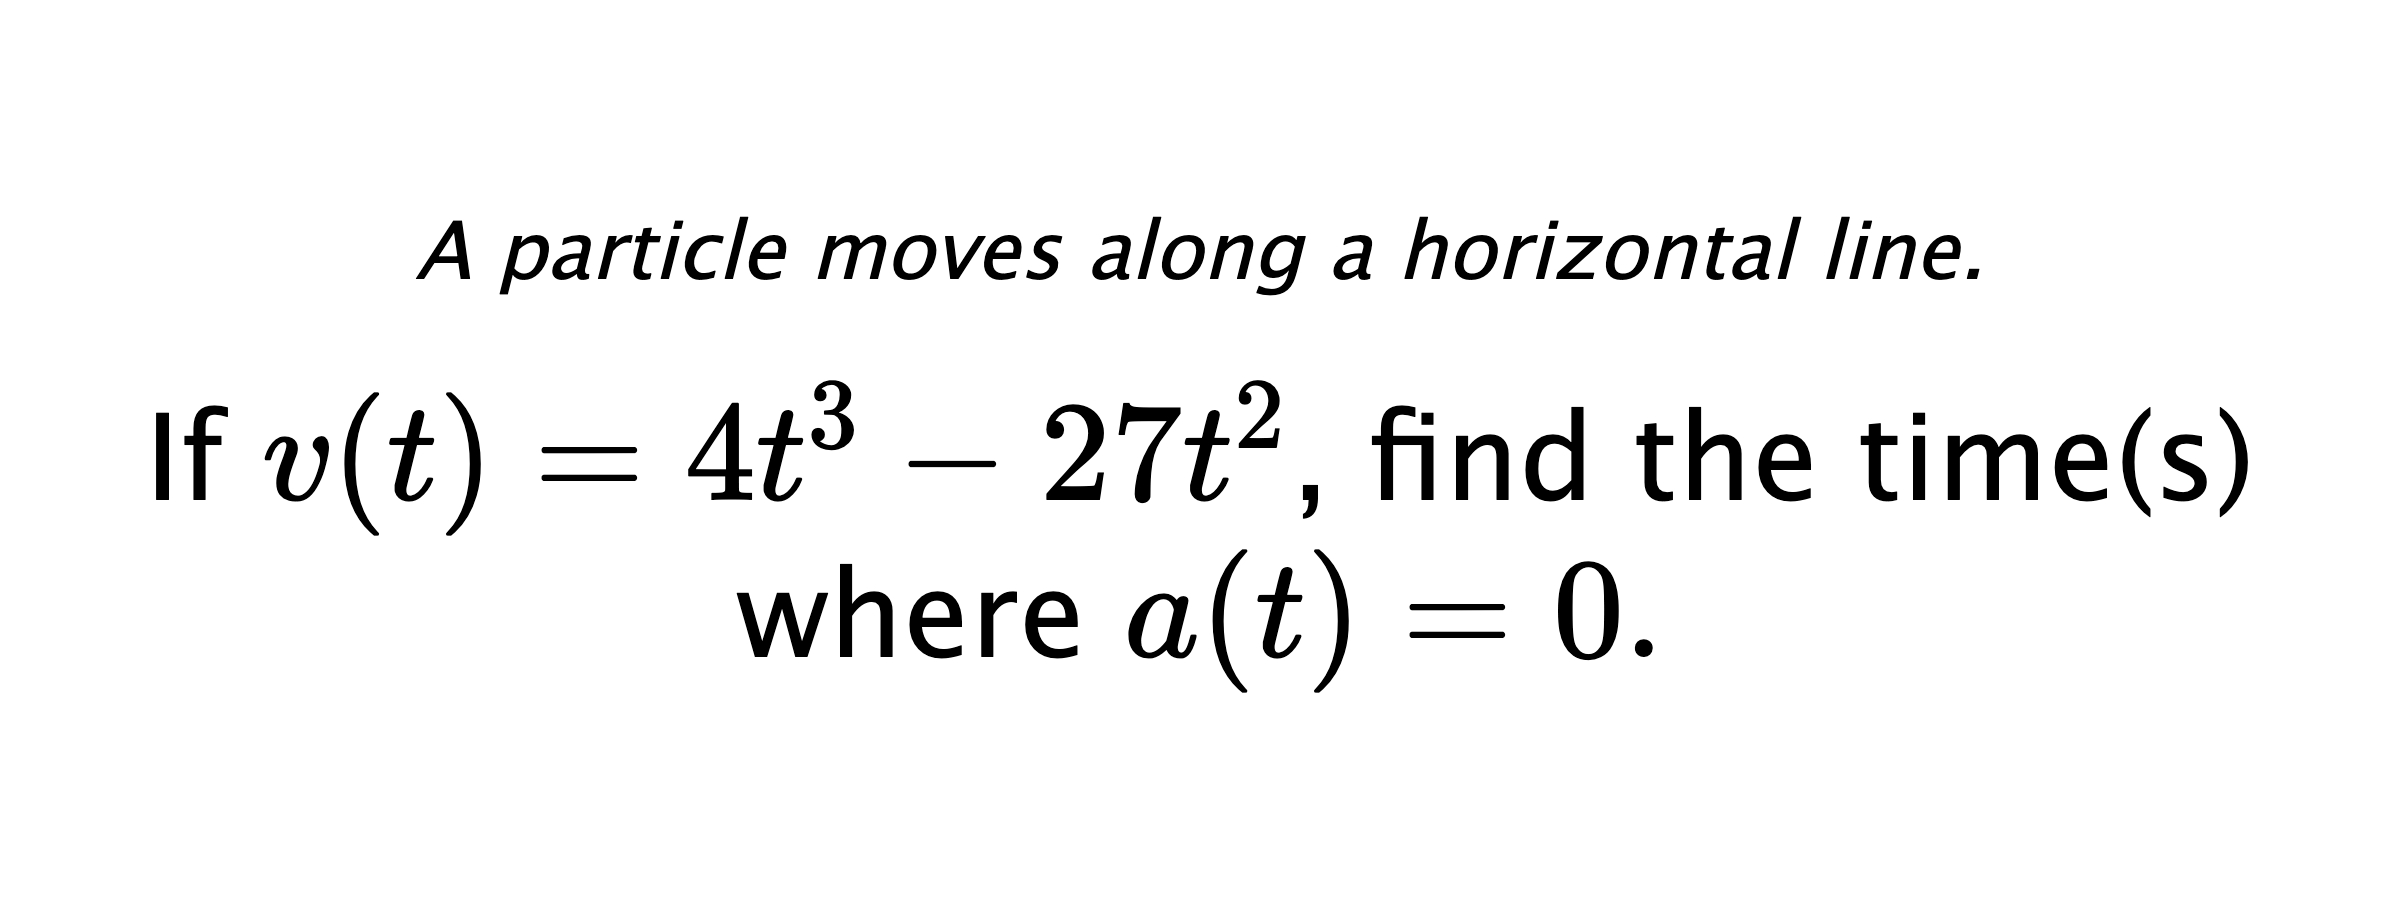 A particle moves along a horizontal line. If $ v(t)=4t^3-27t^2 $, find the time(s) where $ a(t)=0. $